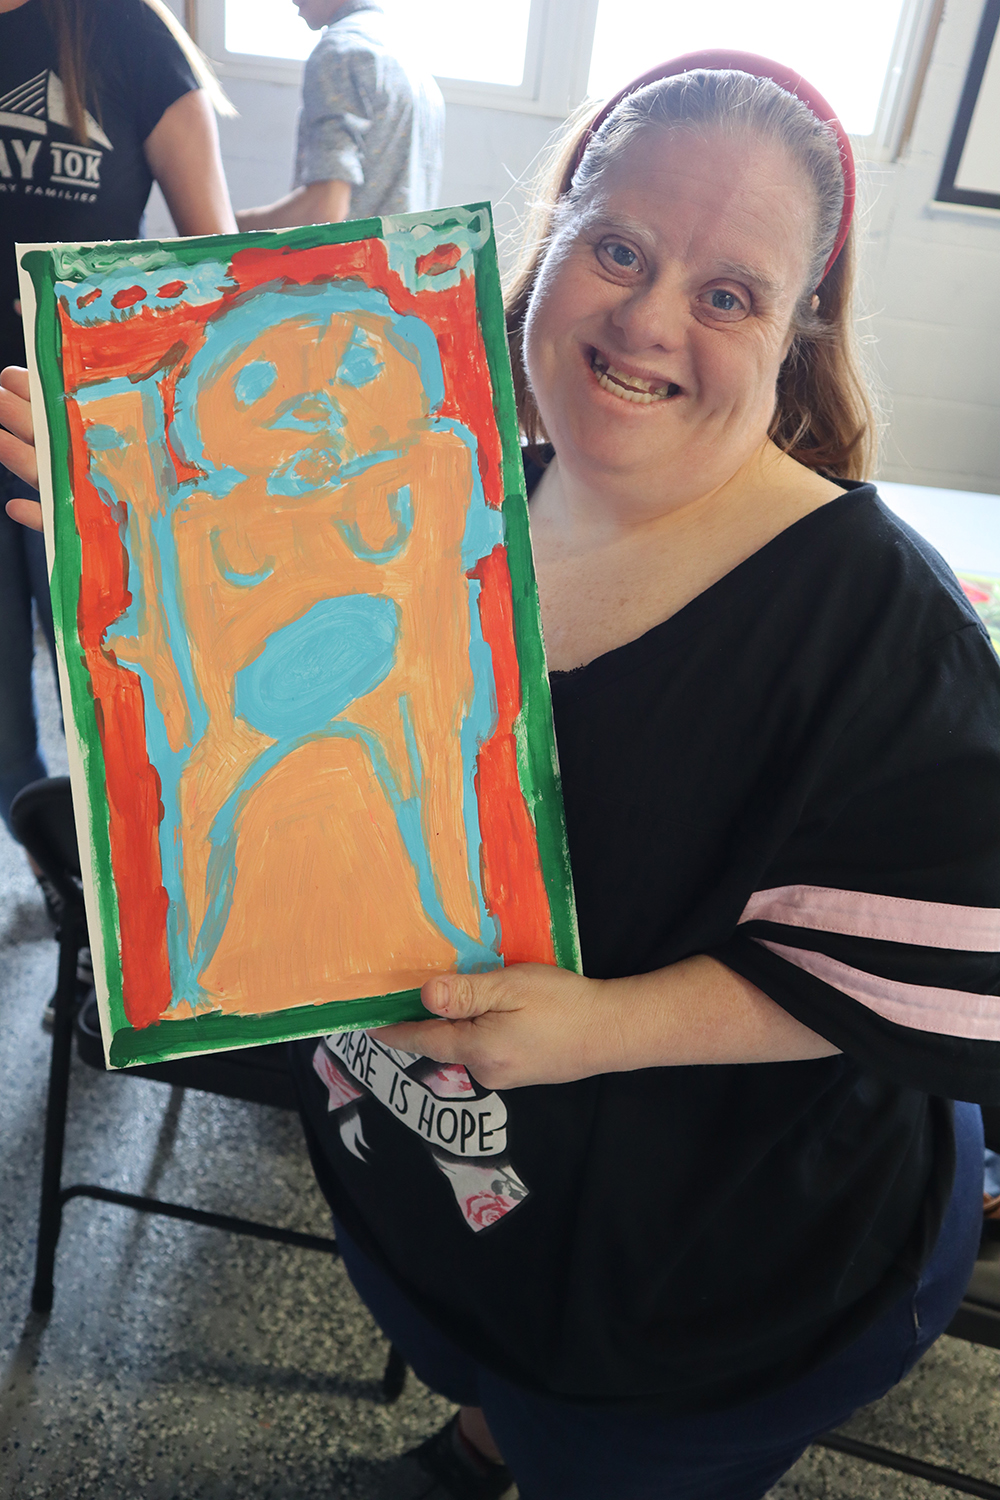 Artist Stacey with her painting, “Bigfoot”. Photo by Marilyn Malara.